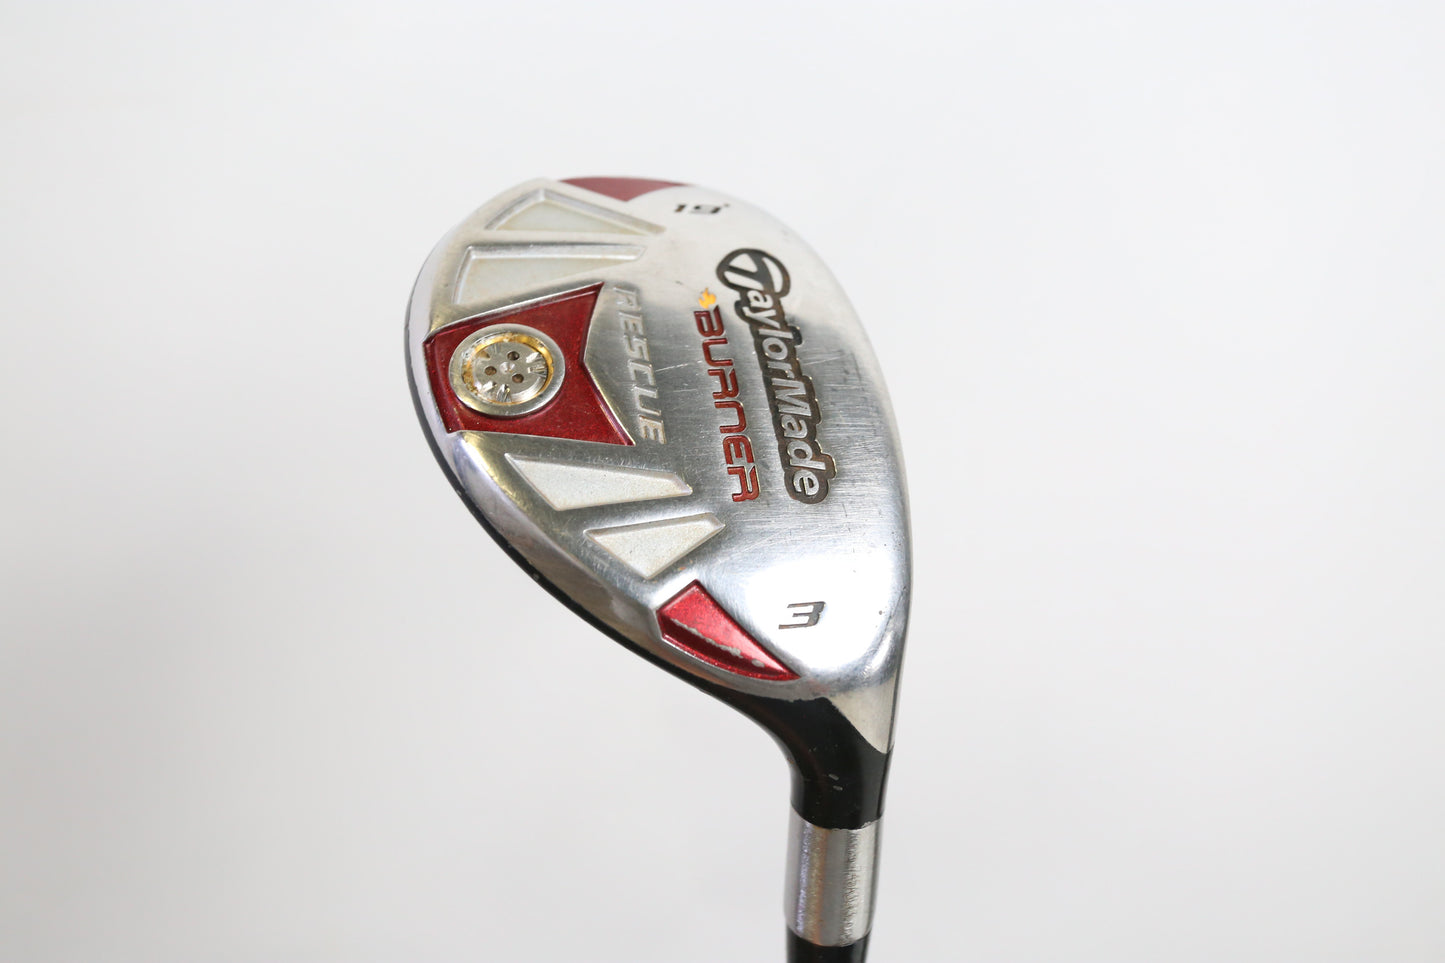 Used TaylorMade Rescue 2009 3H Hybrid - Right-Handed - 19 Degrees - Stiff Flex